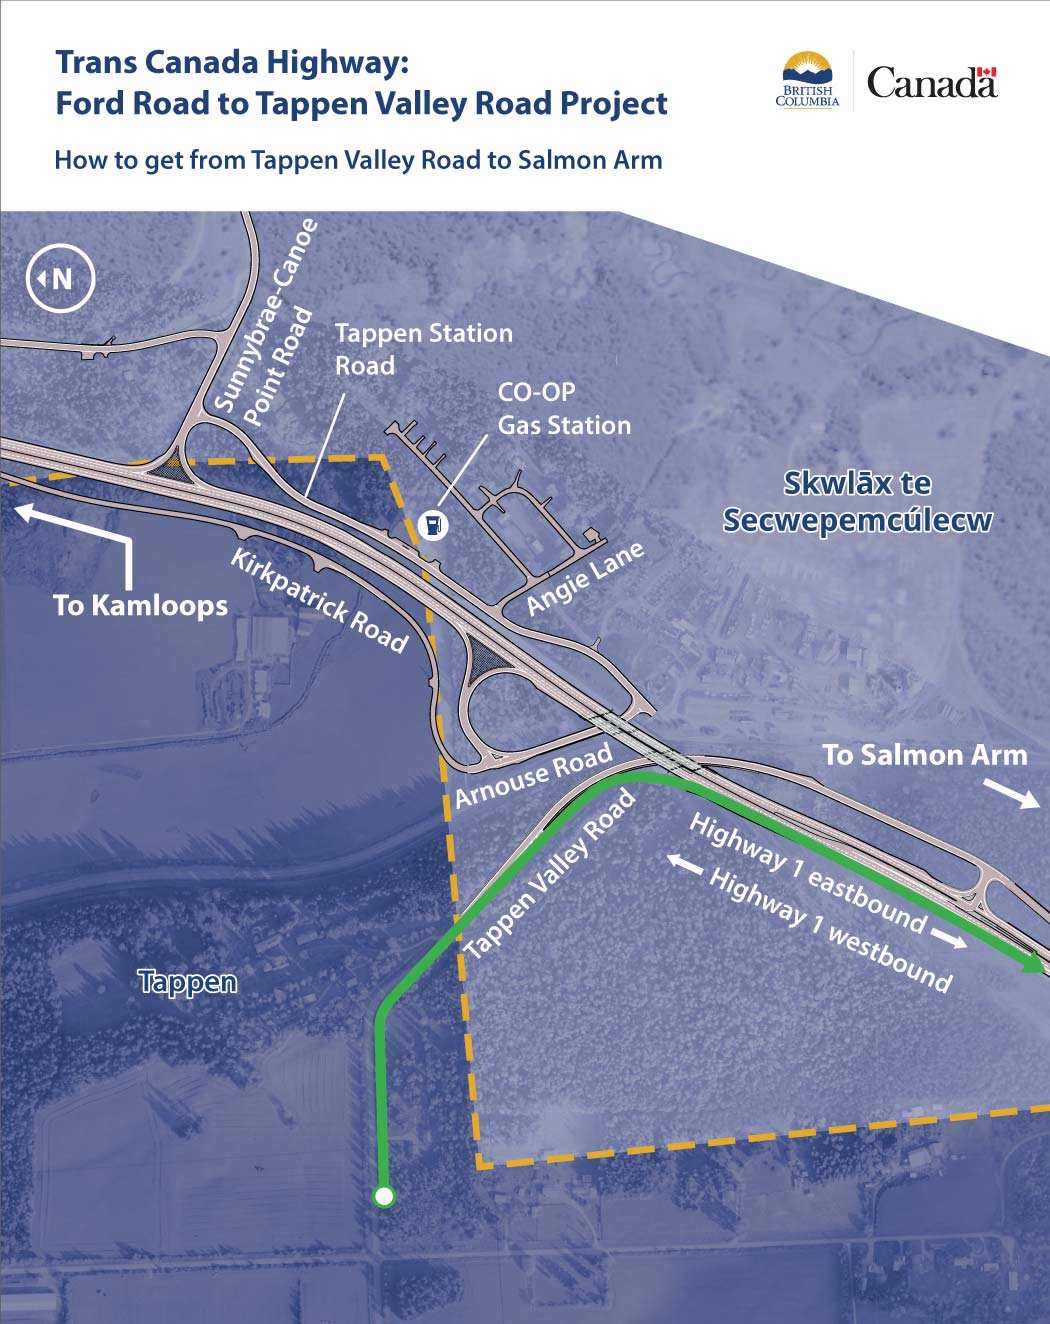 Click to view printable map. From Tappen Valley Road, take the right-hand entrance ramp onto the Trans-Canada Highway 1 Eastbound. Accelerate on the ramp, and merge with highway traffic when safe.